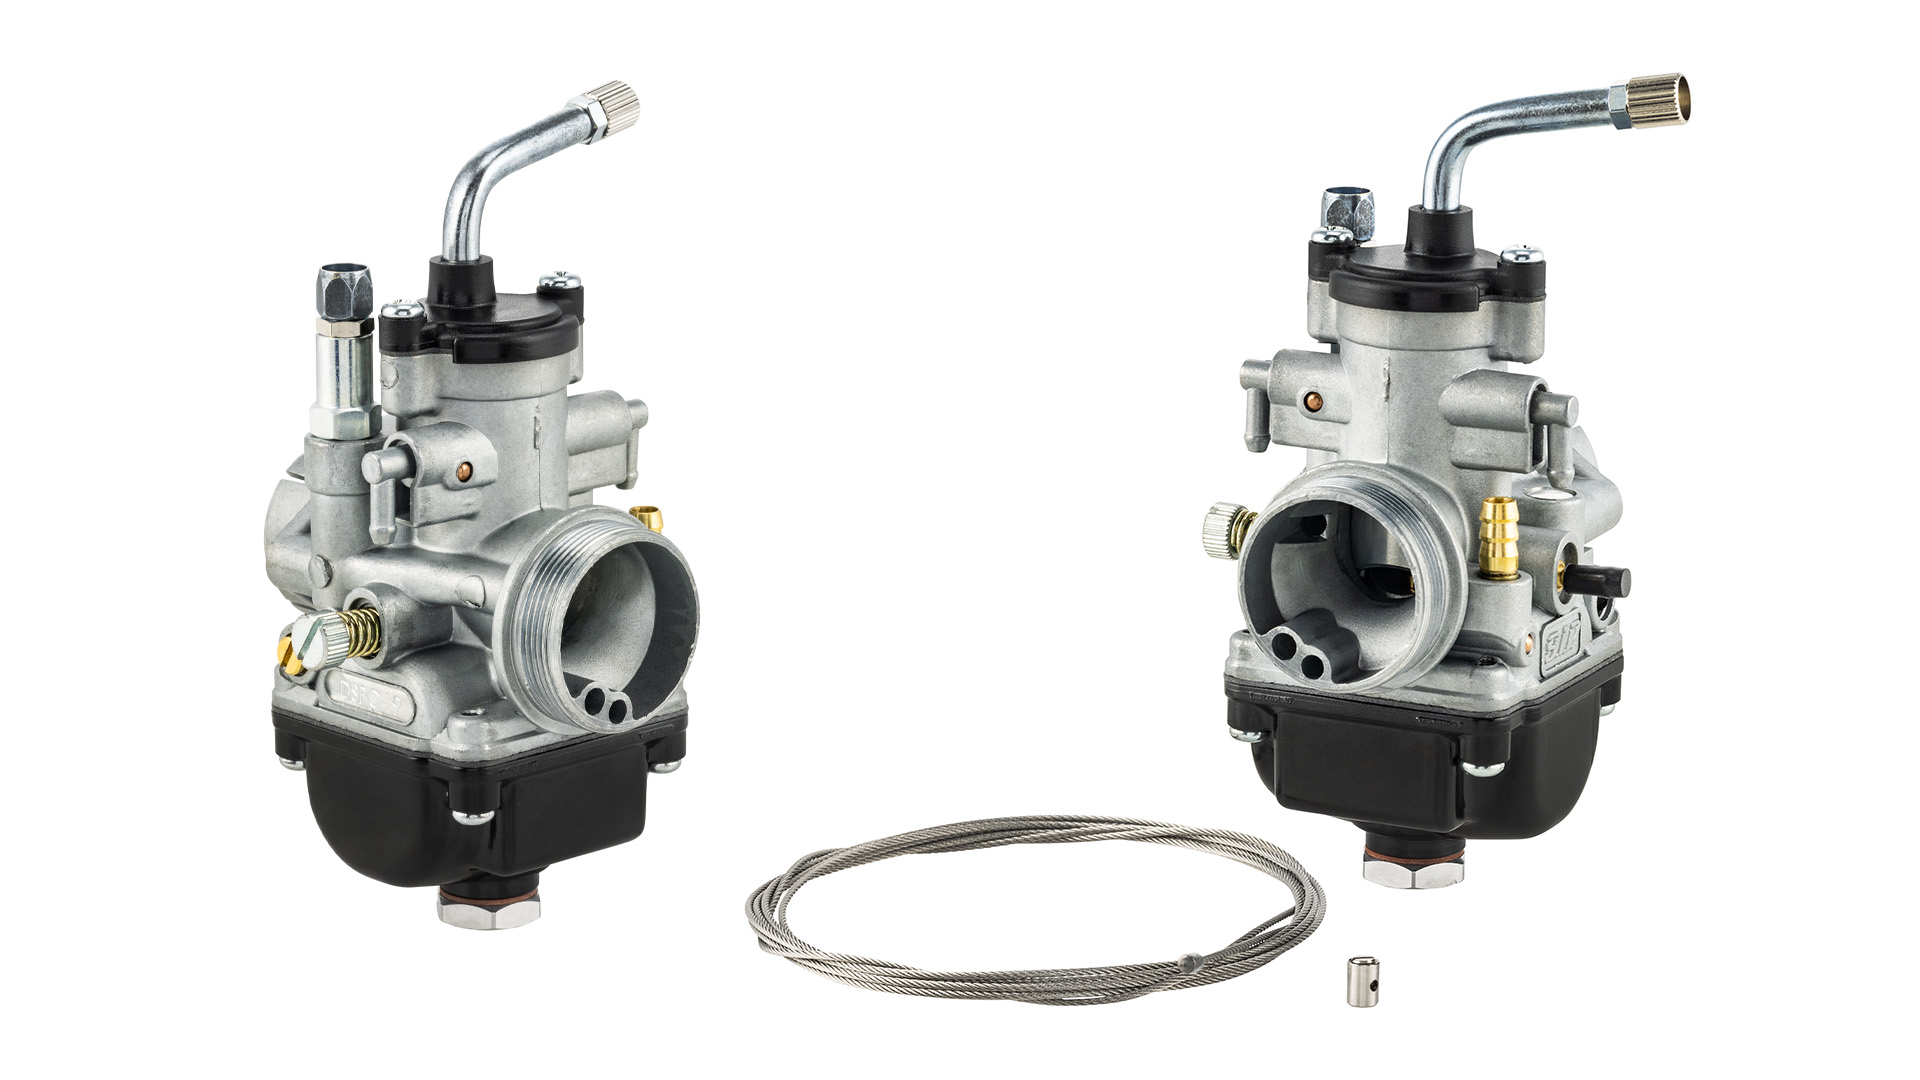 The new DSPC carburettor from SIP for the Vespa